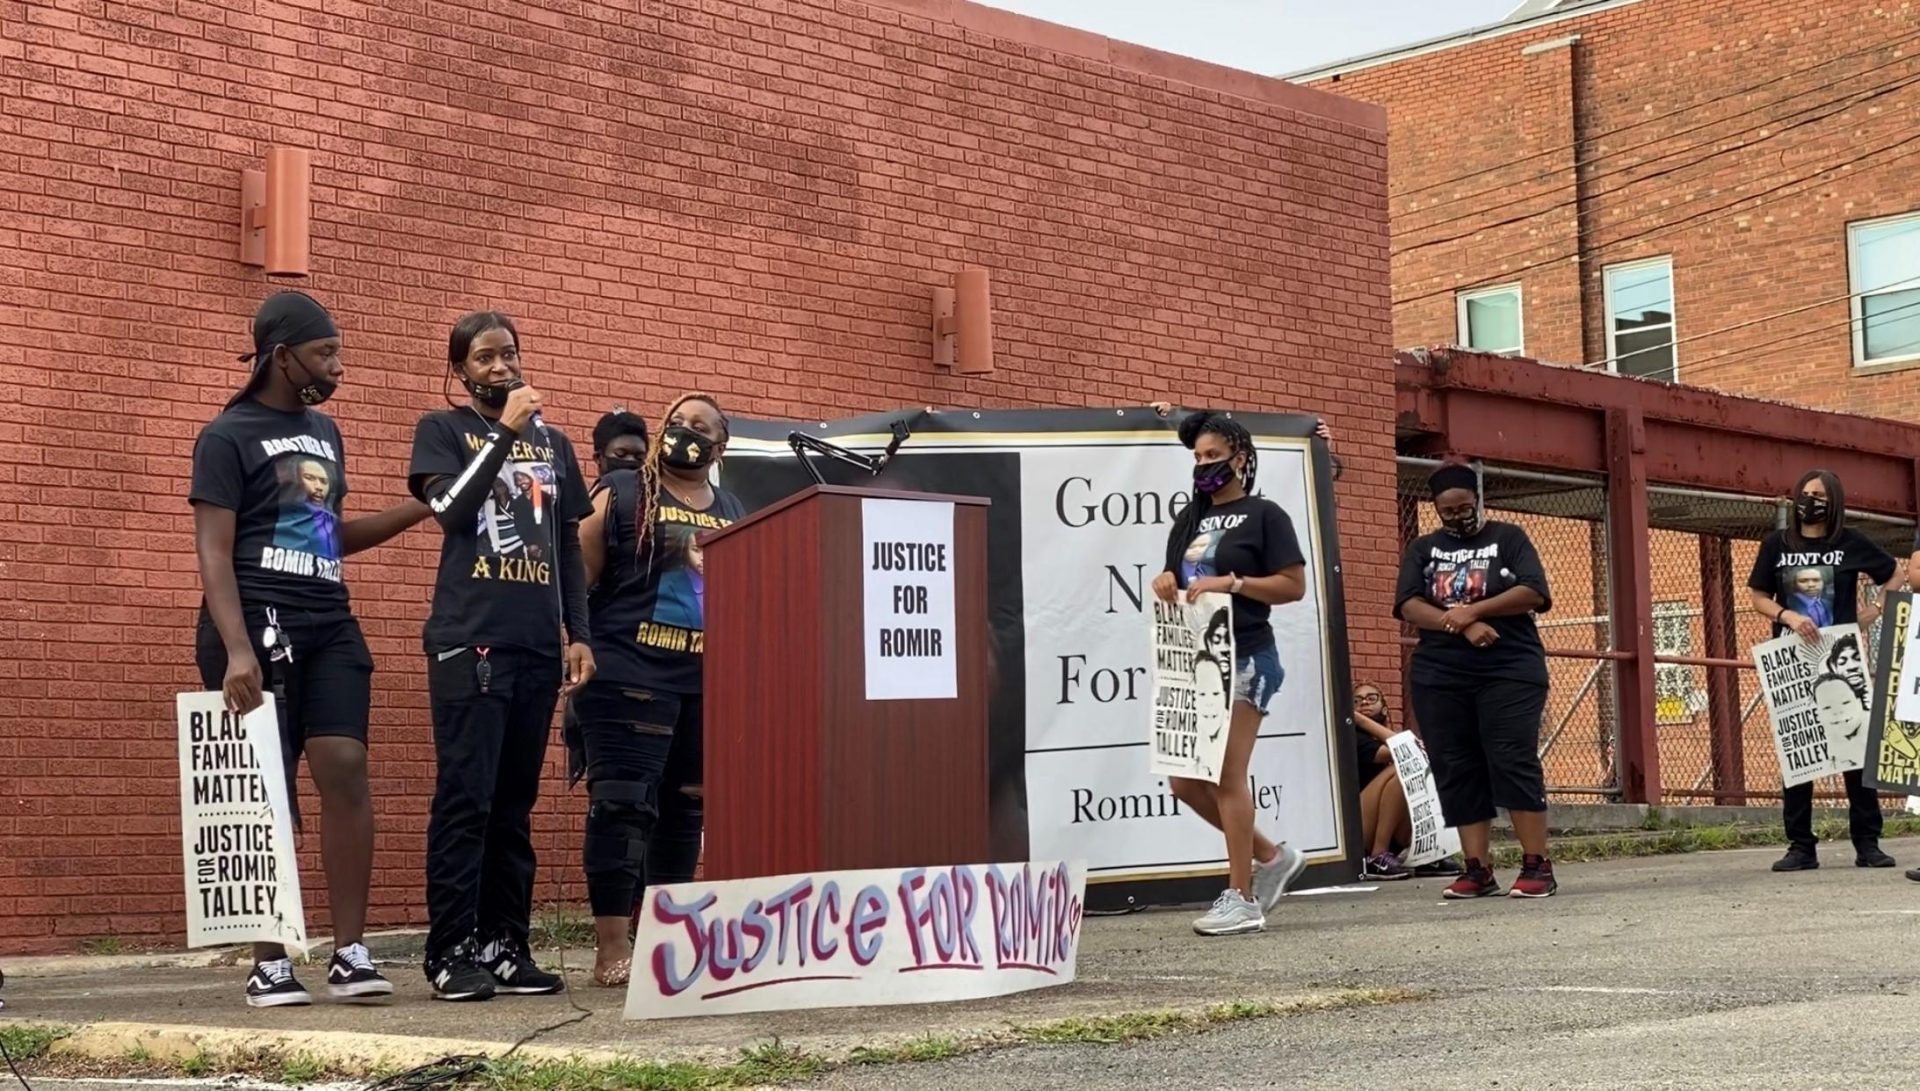 Latasha Talley, Romir Talley's mother, speaks at a protest in Wilkinsburg Saturday. Behind her is the wall where a mural for her son was painted in July.